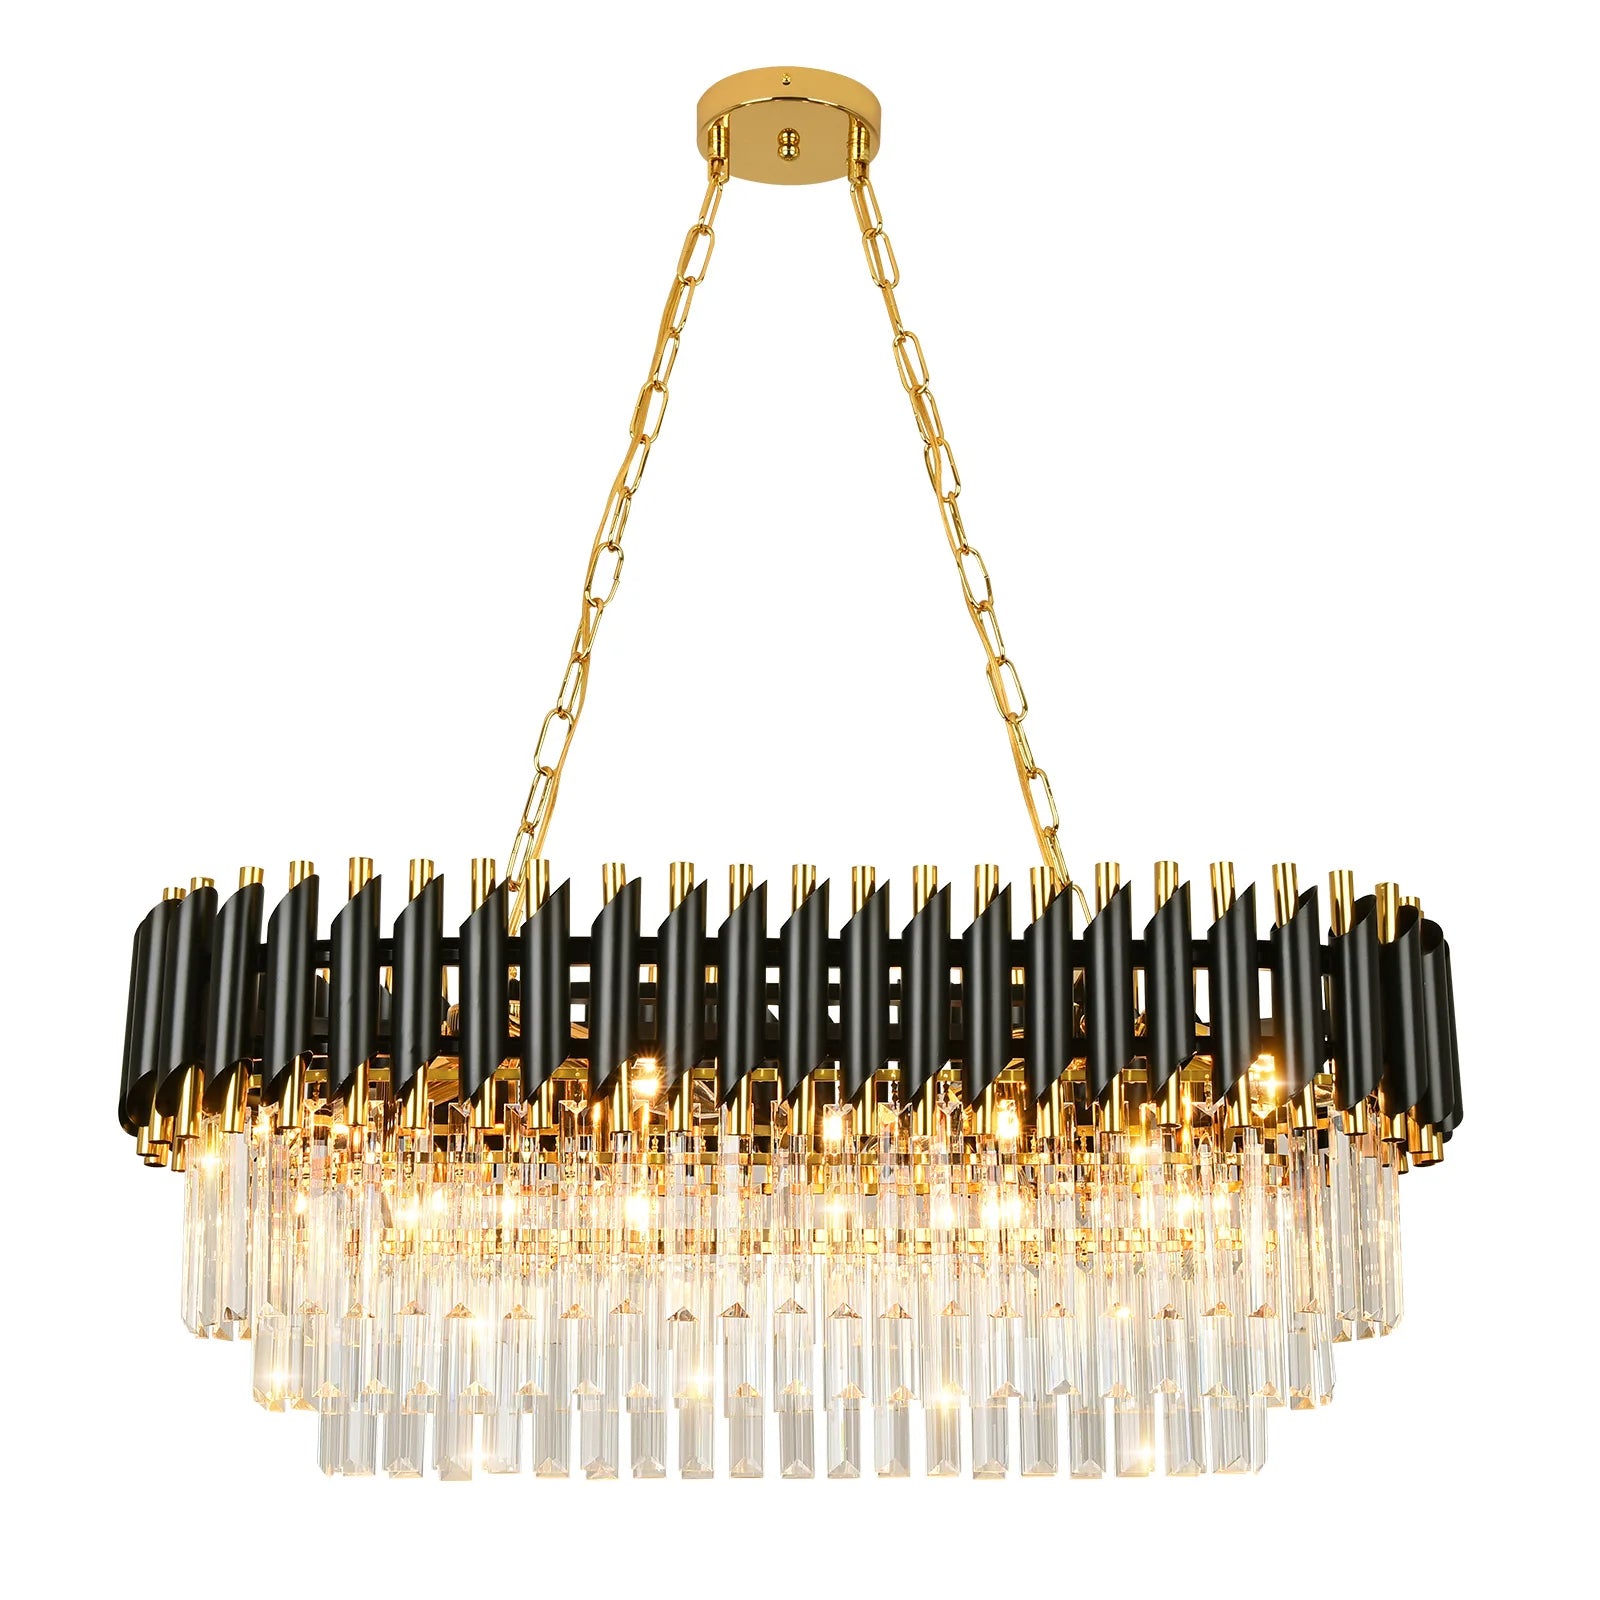 A Verano Crystal Dining Room Light Fixture by Morsale.com with an oval frame featuring alternating black and gold rods. Boasting contemporary design, it has multiple tiers of clear crystal prisms that emit a radiant glow. The dimmable chandelier is suspended by a golden chain attached to a gold ceiling plate.